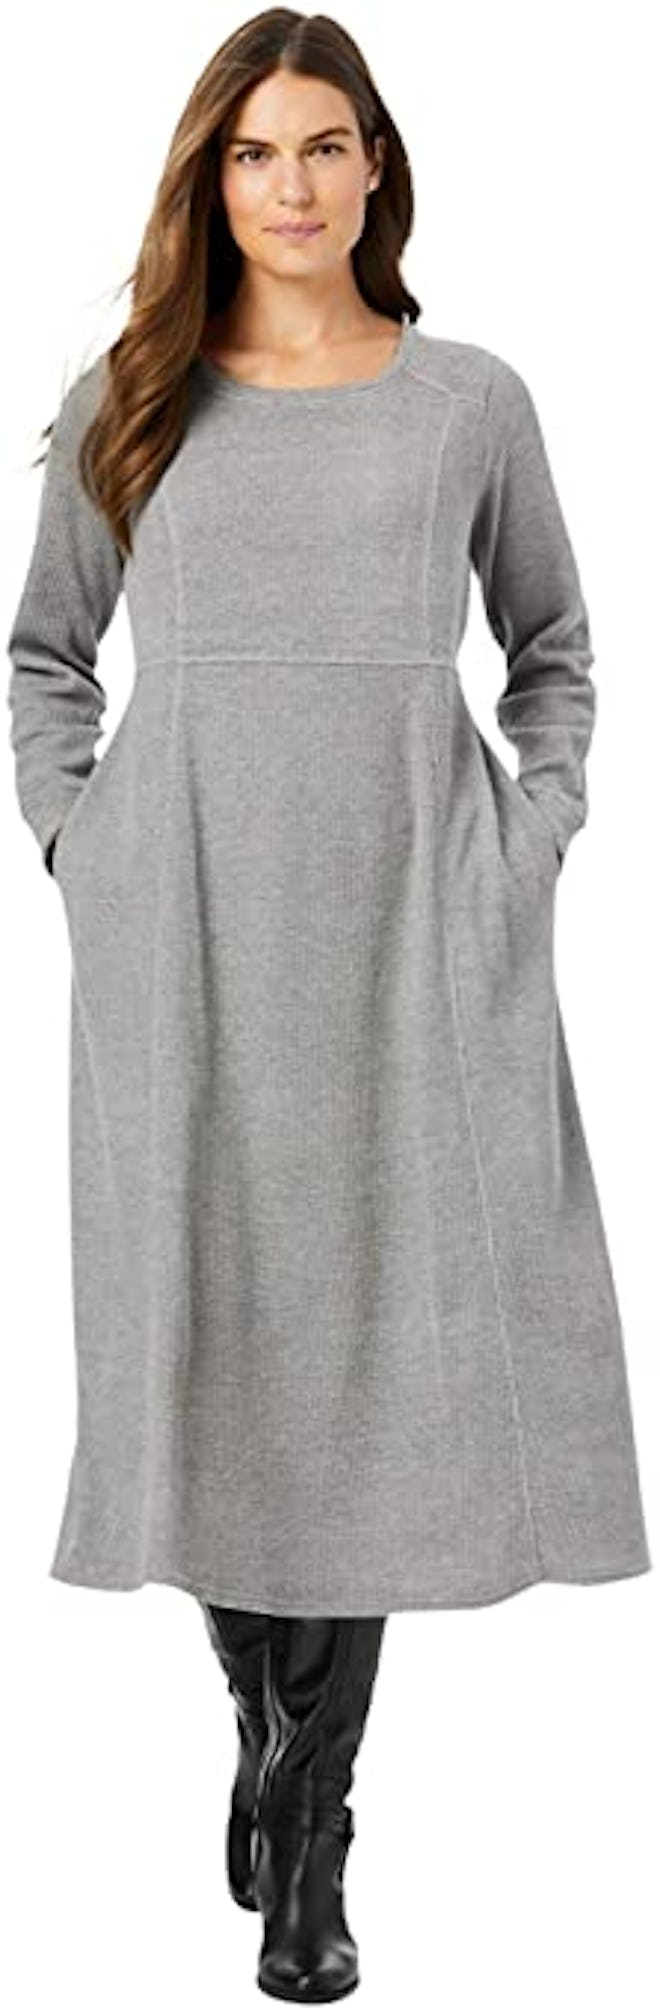 Woman Within Plus Size Thermal Knit A-Line Dress